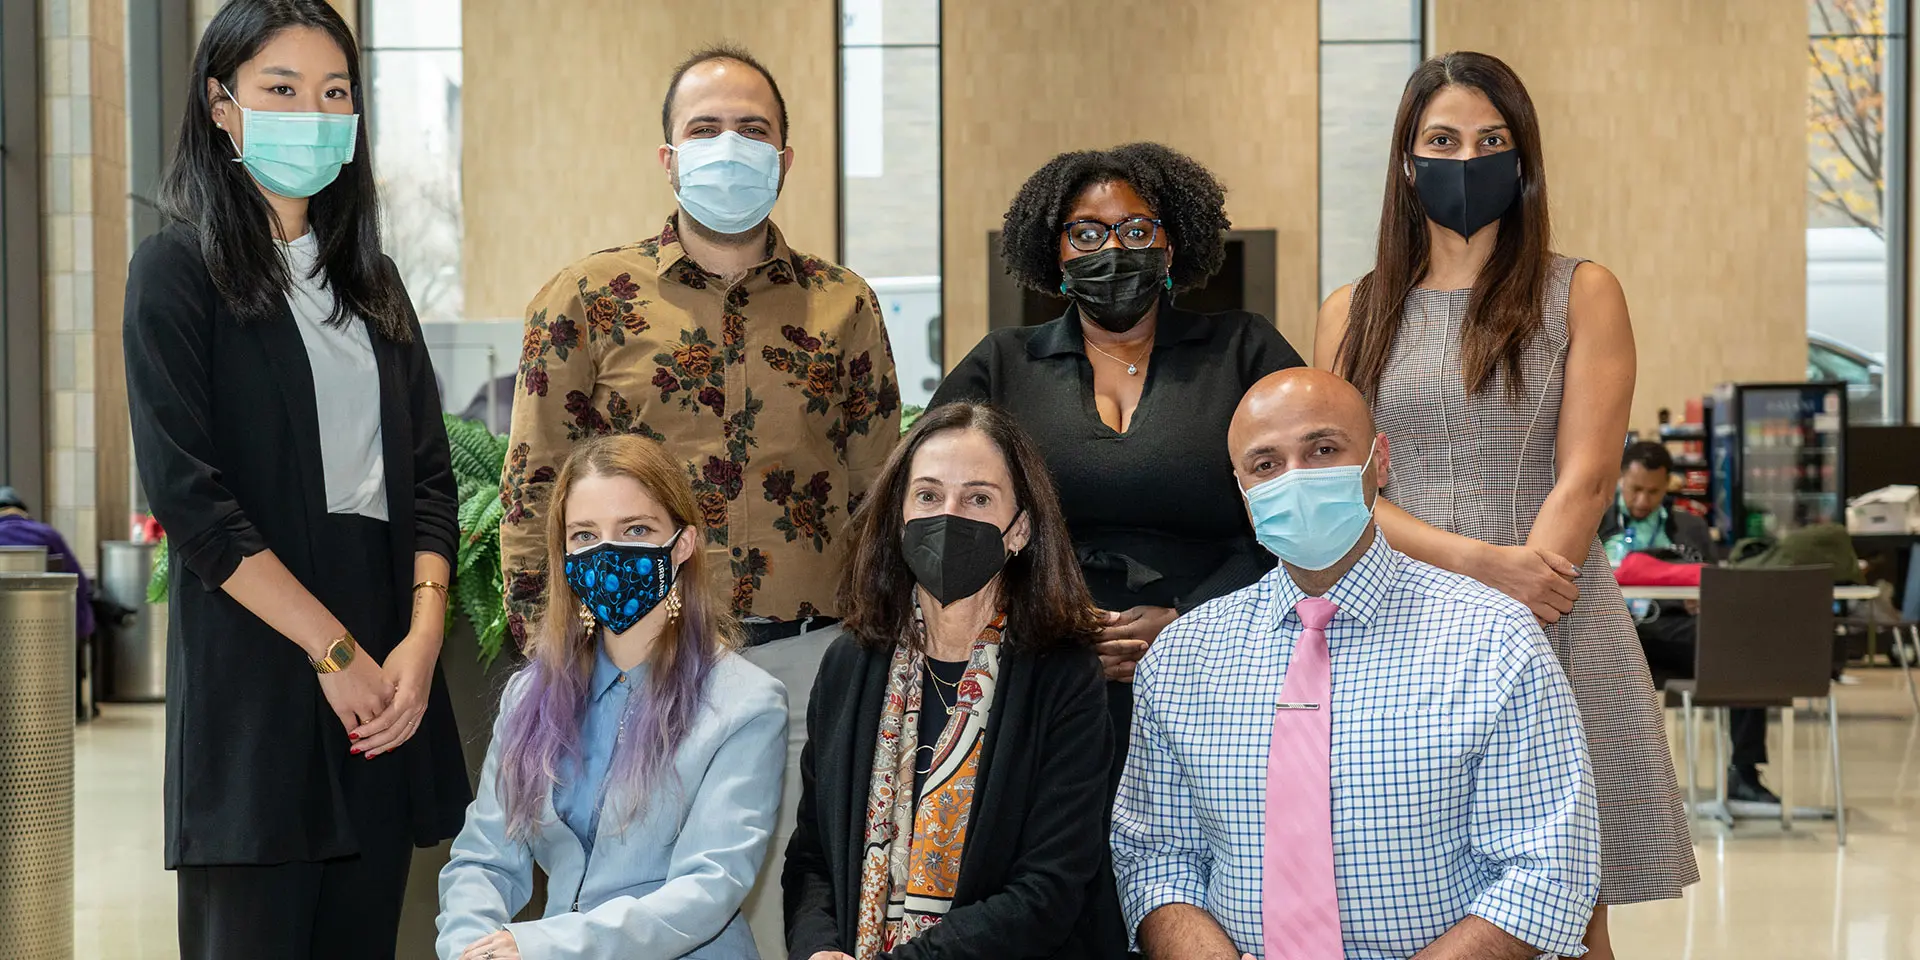 Psychiatry DEI Committee members at The Mount Sinai Hospital, from left to right (back row): Sabrina Shih, LMSW; Ali Haidar, MD; Naomi Dambreville, PhD; Rajvee Vora, MD. From left to right (front row): Alla Prokhovnik-Raphique, PhD; Jane Martin, PhD; and Anand Sukumaran, MD  





